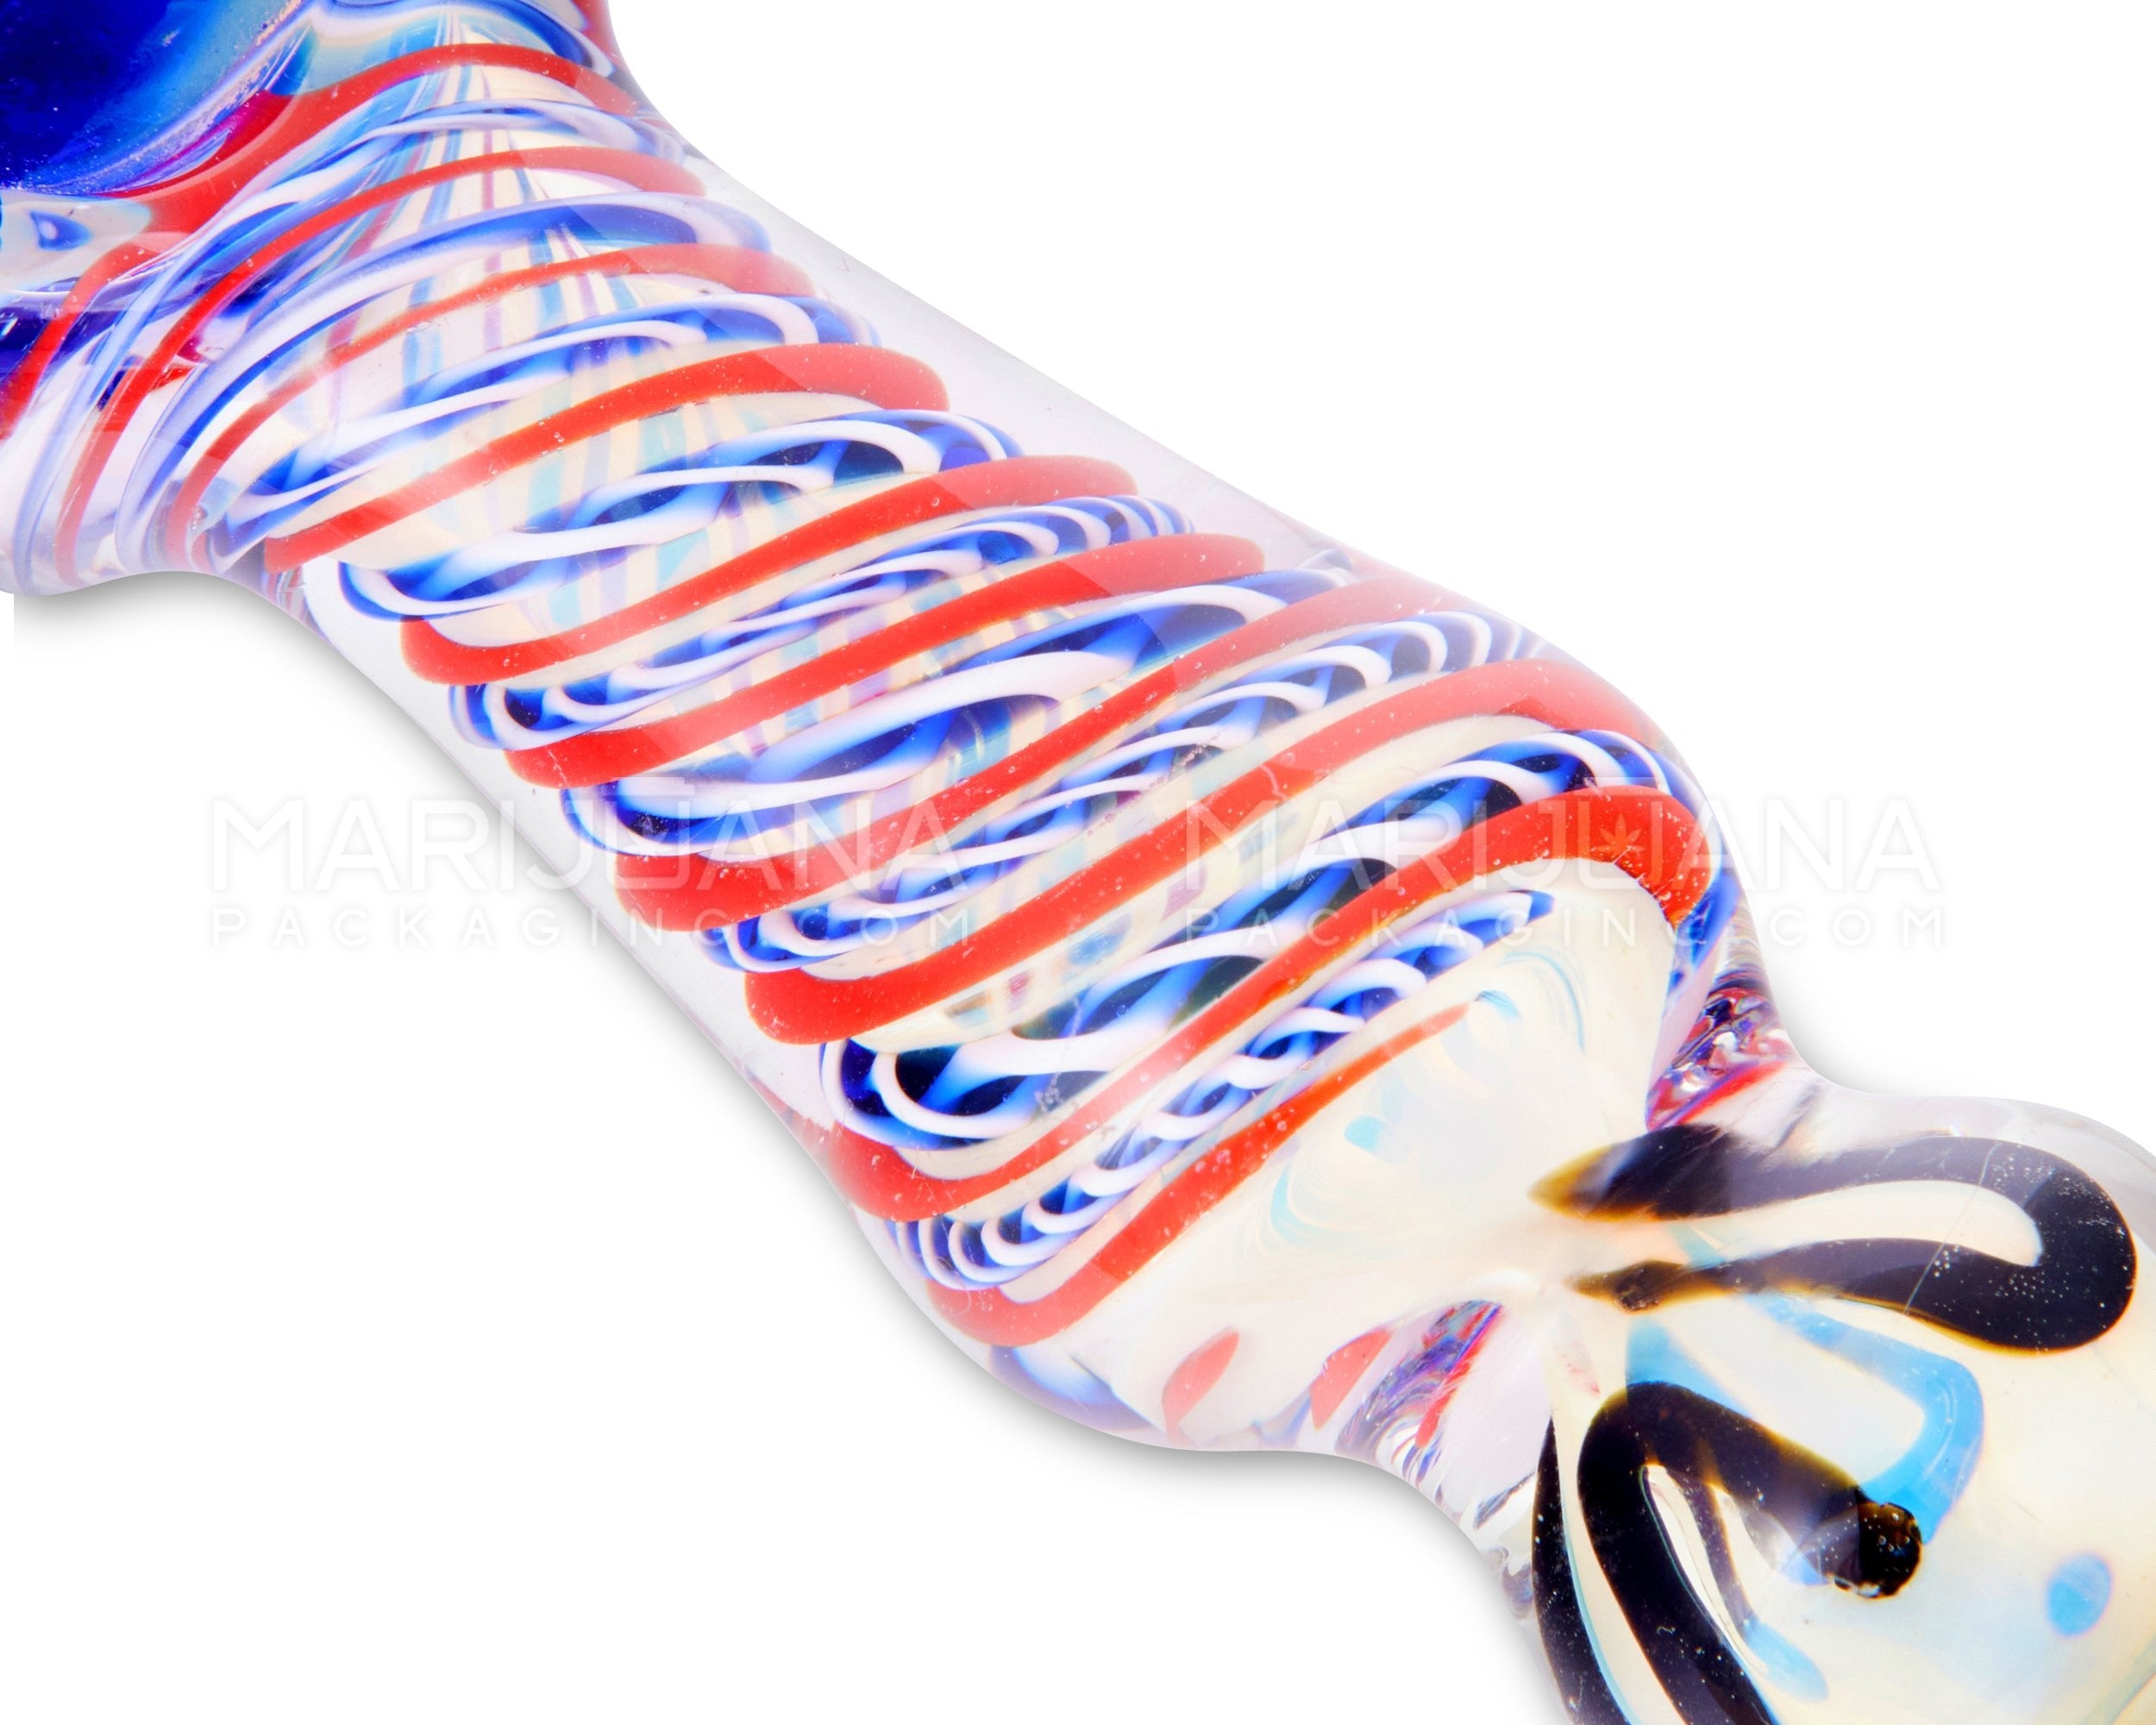 Spiral & Fumed Bulged Spoon Hand Pipe w/ Triple Knockers & Ribboning | 5in Long - Glass - Assorted - 3